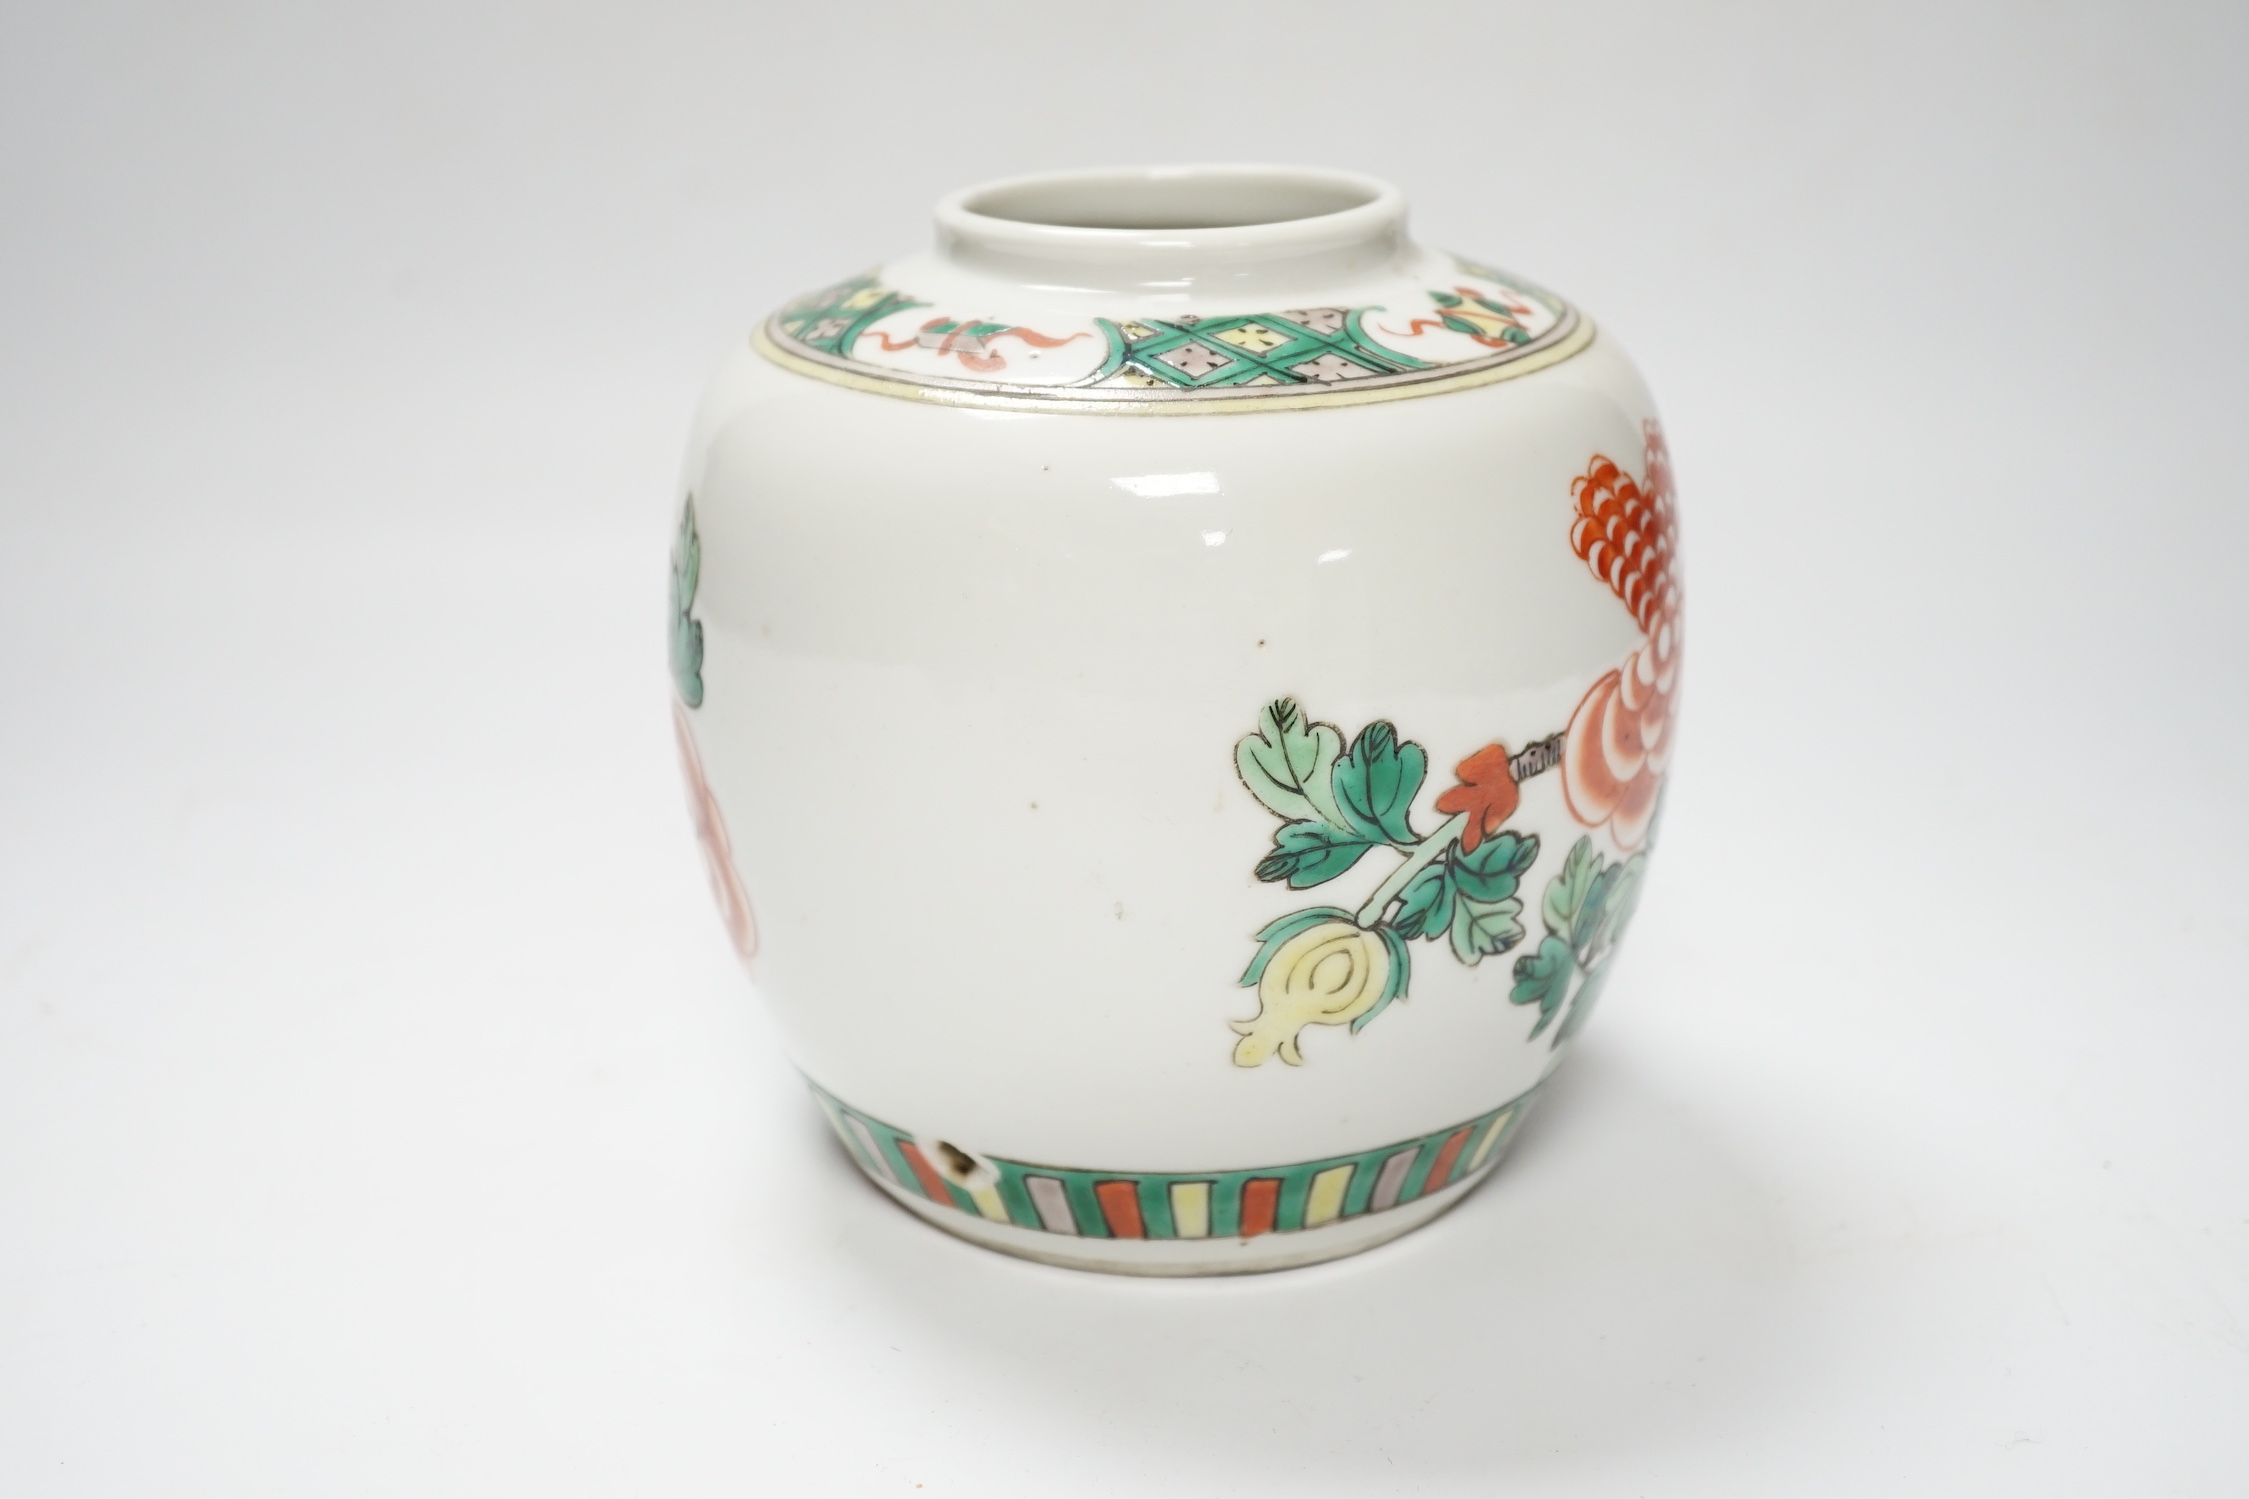 A Chinese famille verte ‘phoenix’ jar, early 20th century, 13cm high